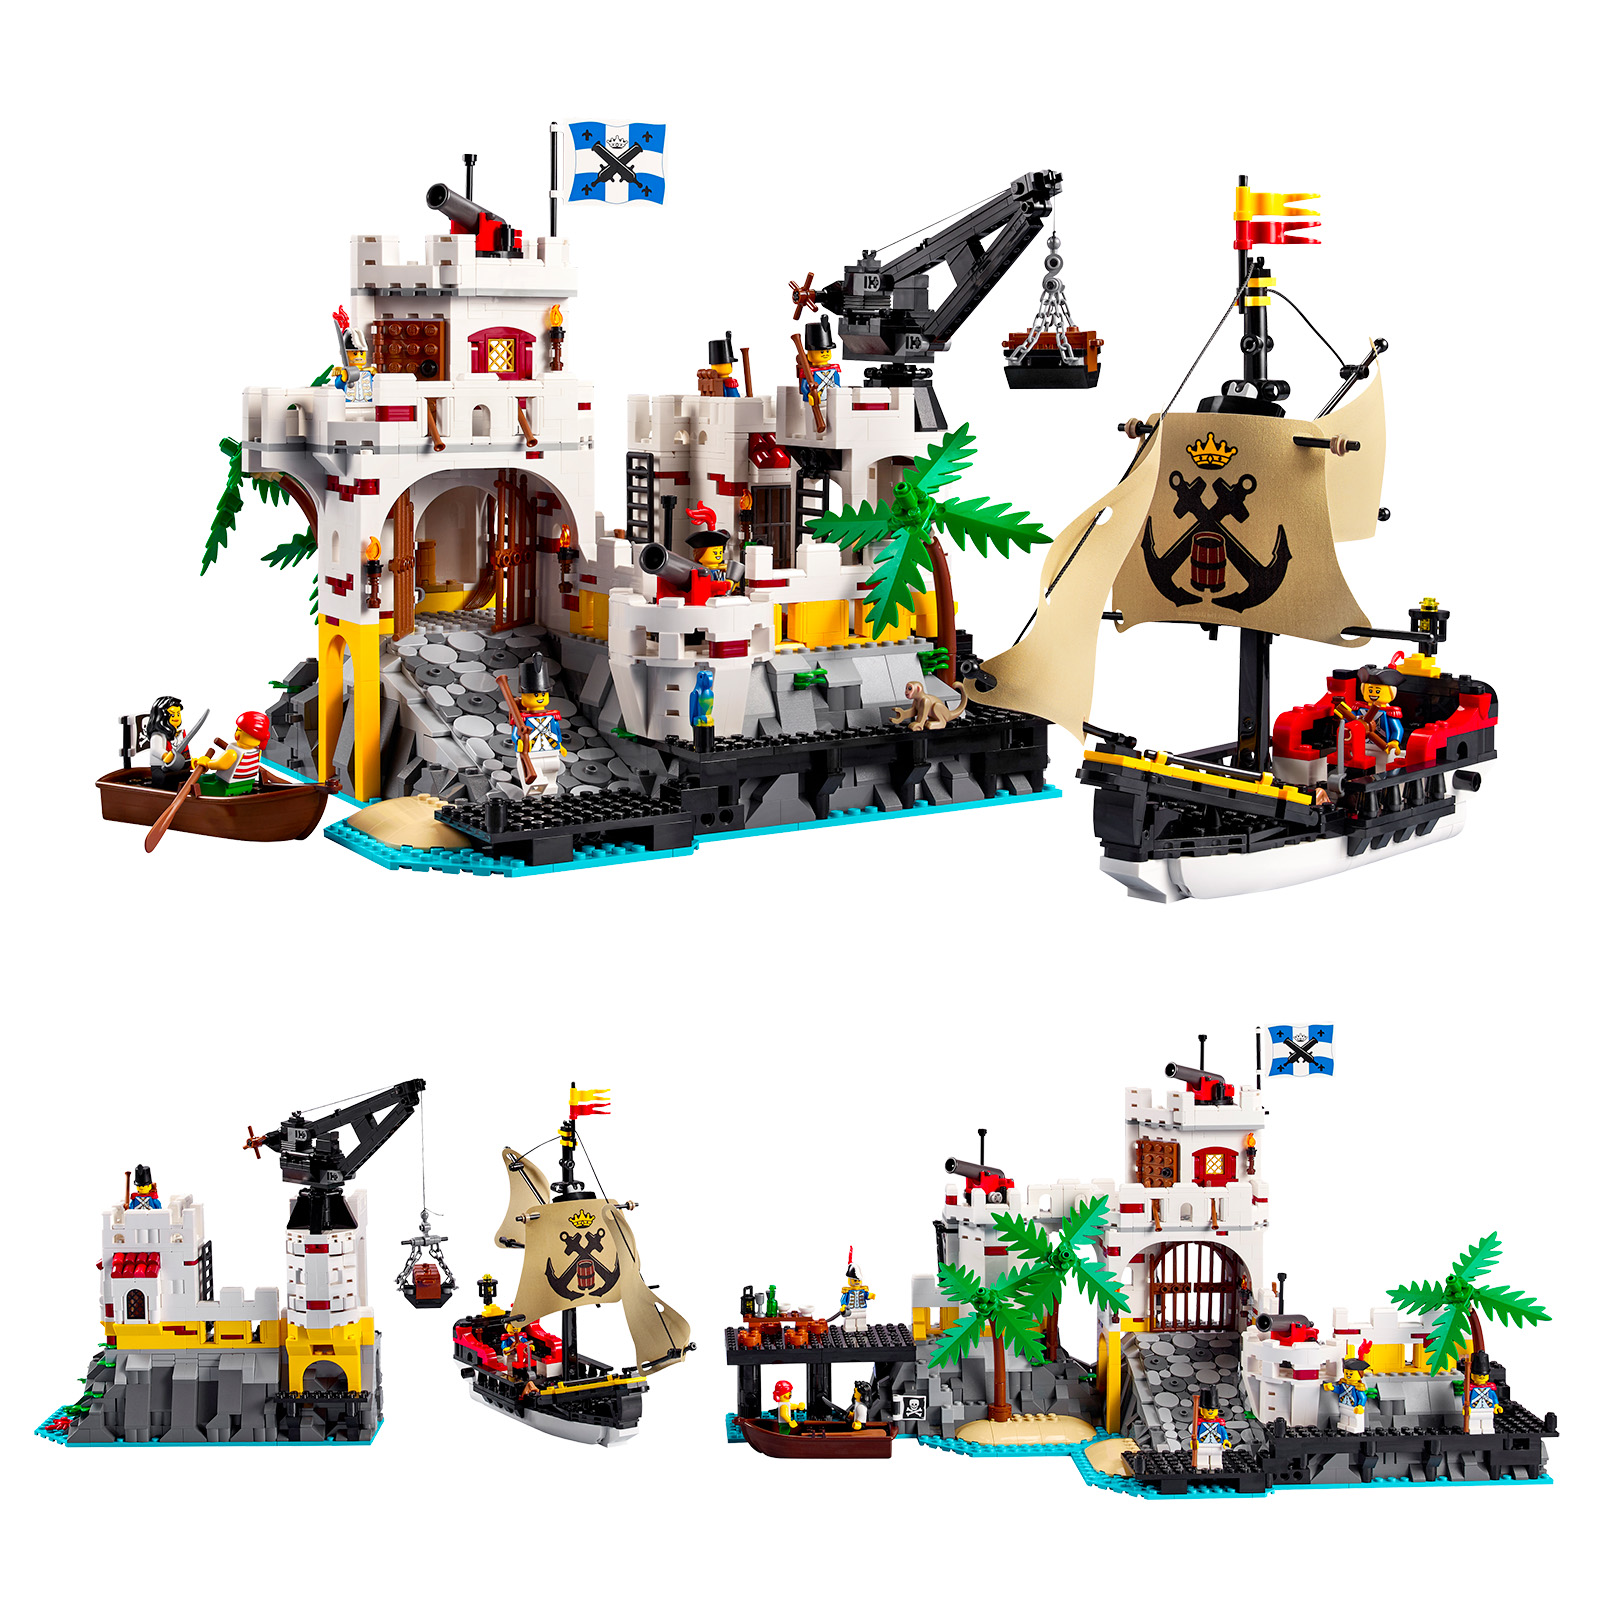 Yes you can make this a real Lego set! It is free and easy to support! If 1  out of every 3 people support you could get Lego to remake this into